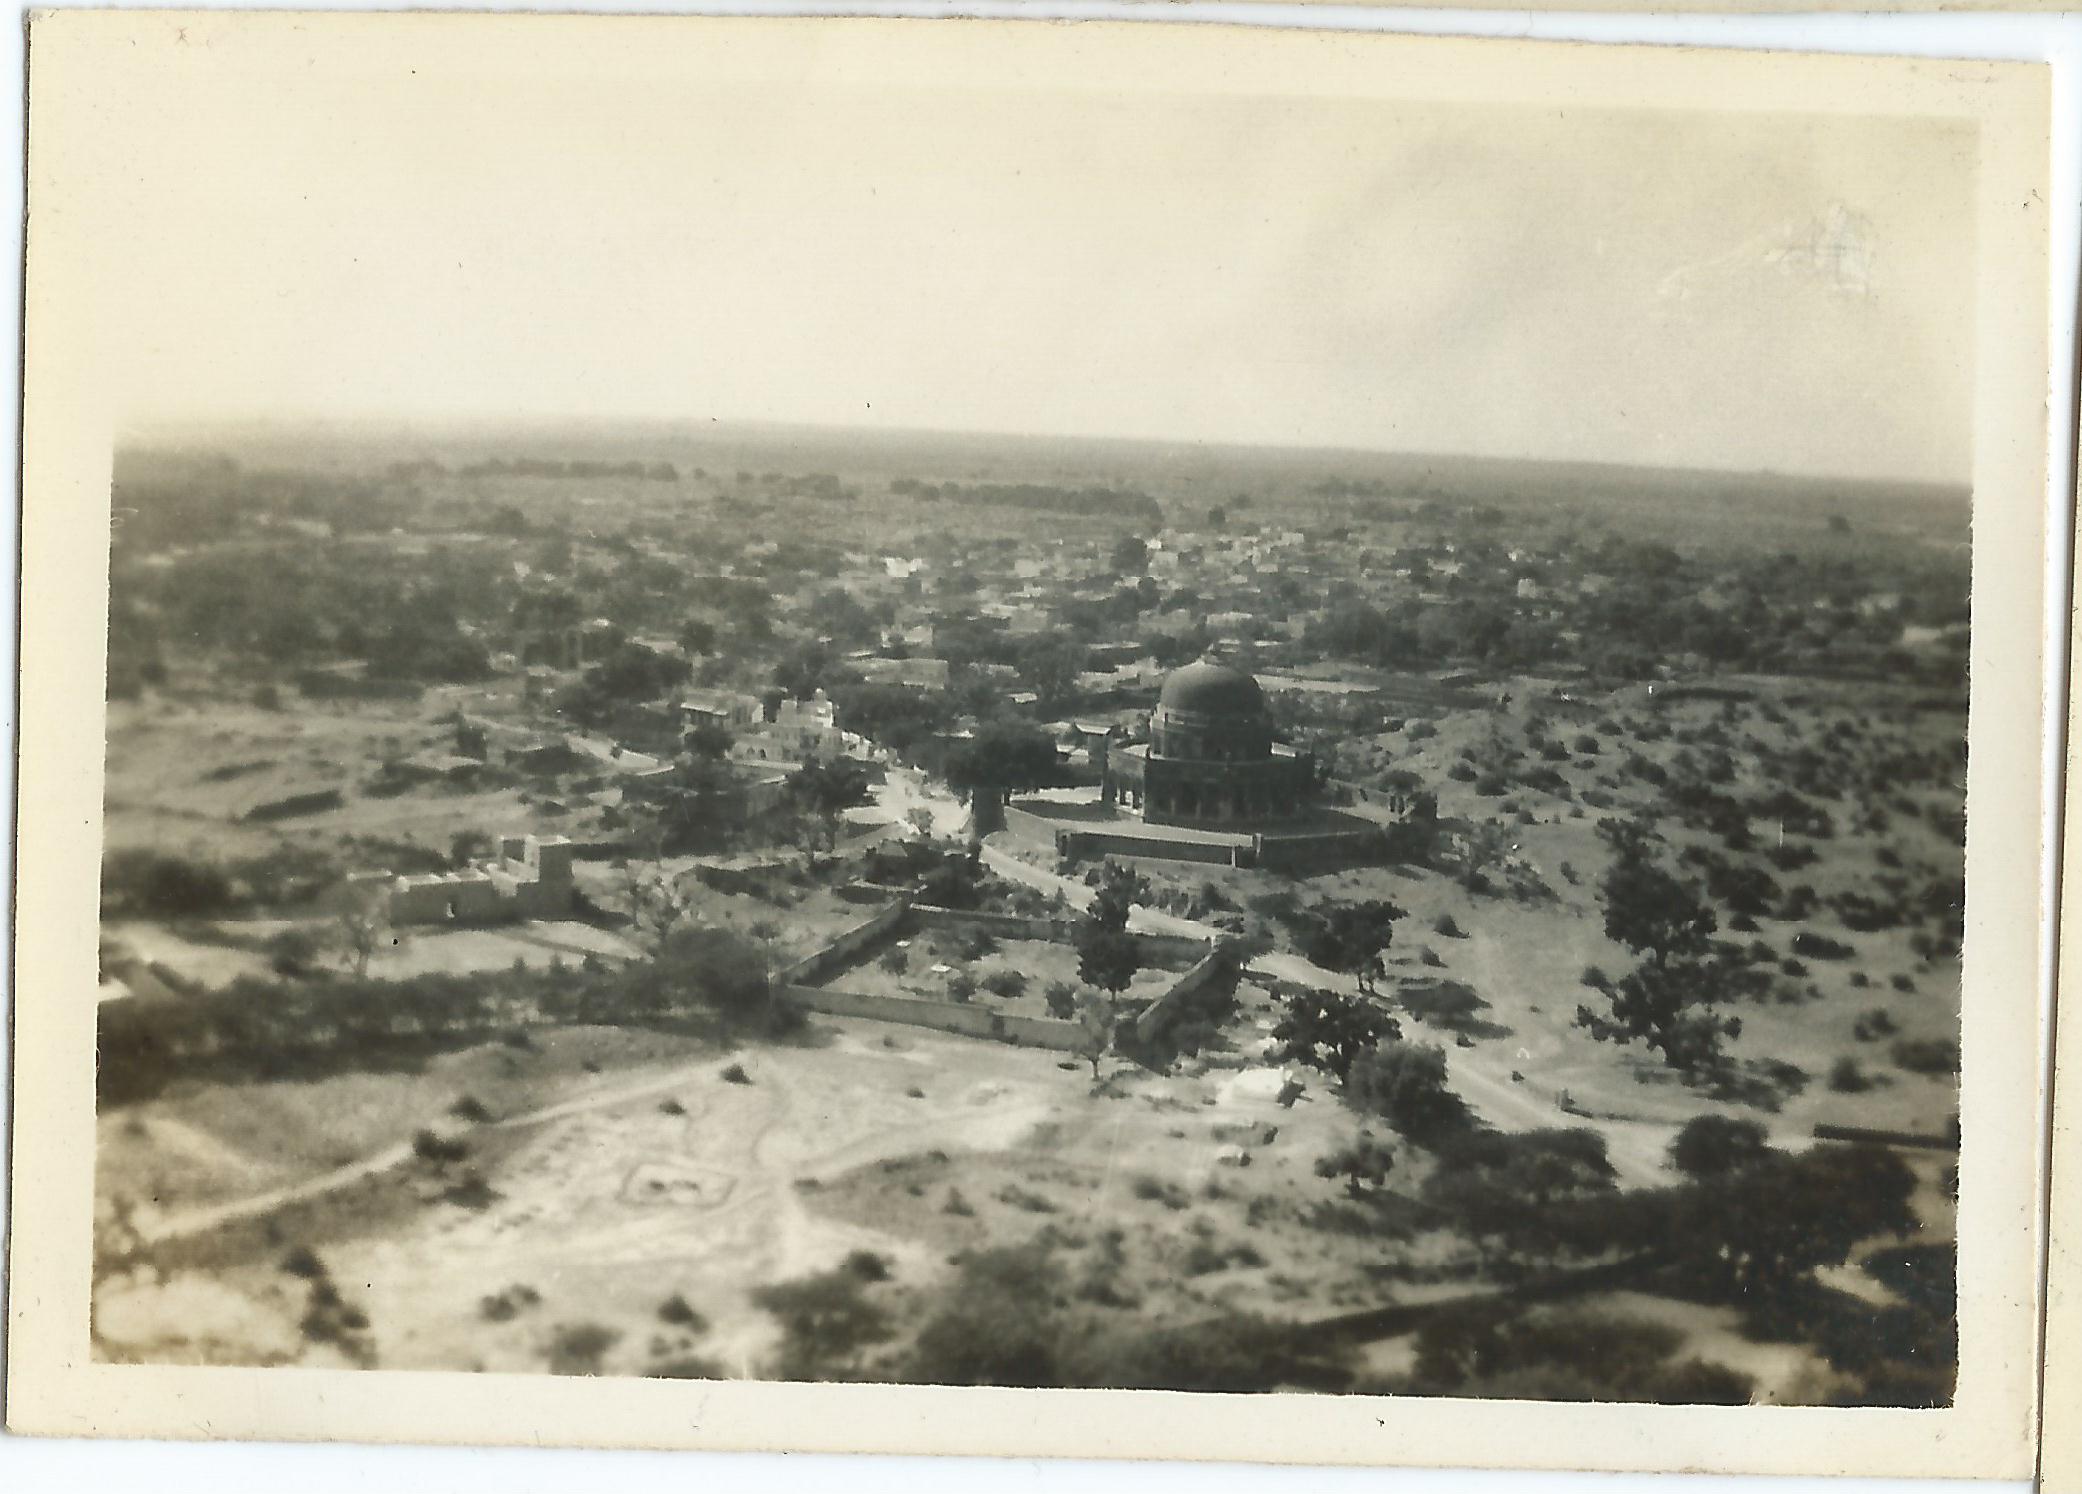 A photo of Adham Khan's Tomb in Mehrauli taken from the top of Qutub Minar, early 1940s. Photo by Narain Prasad